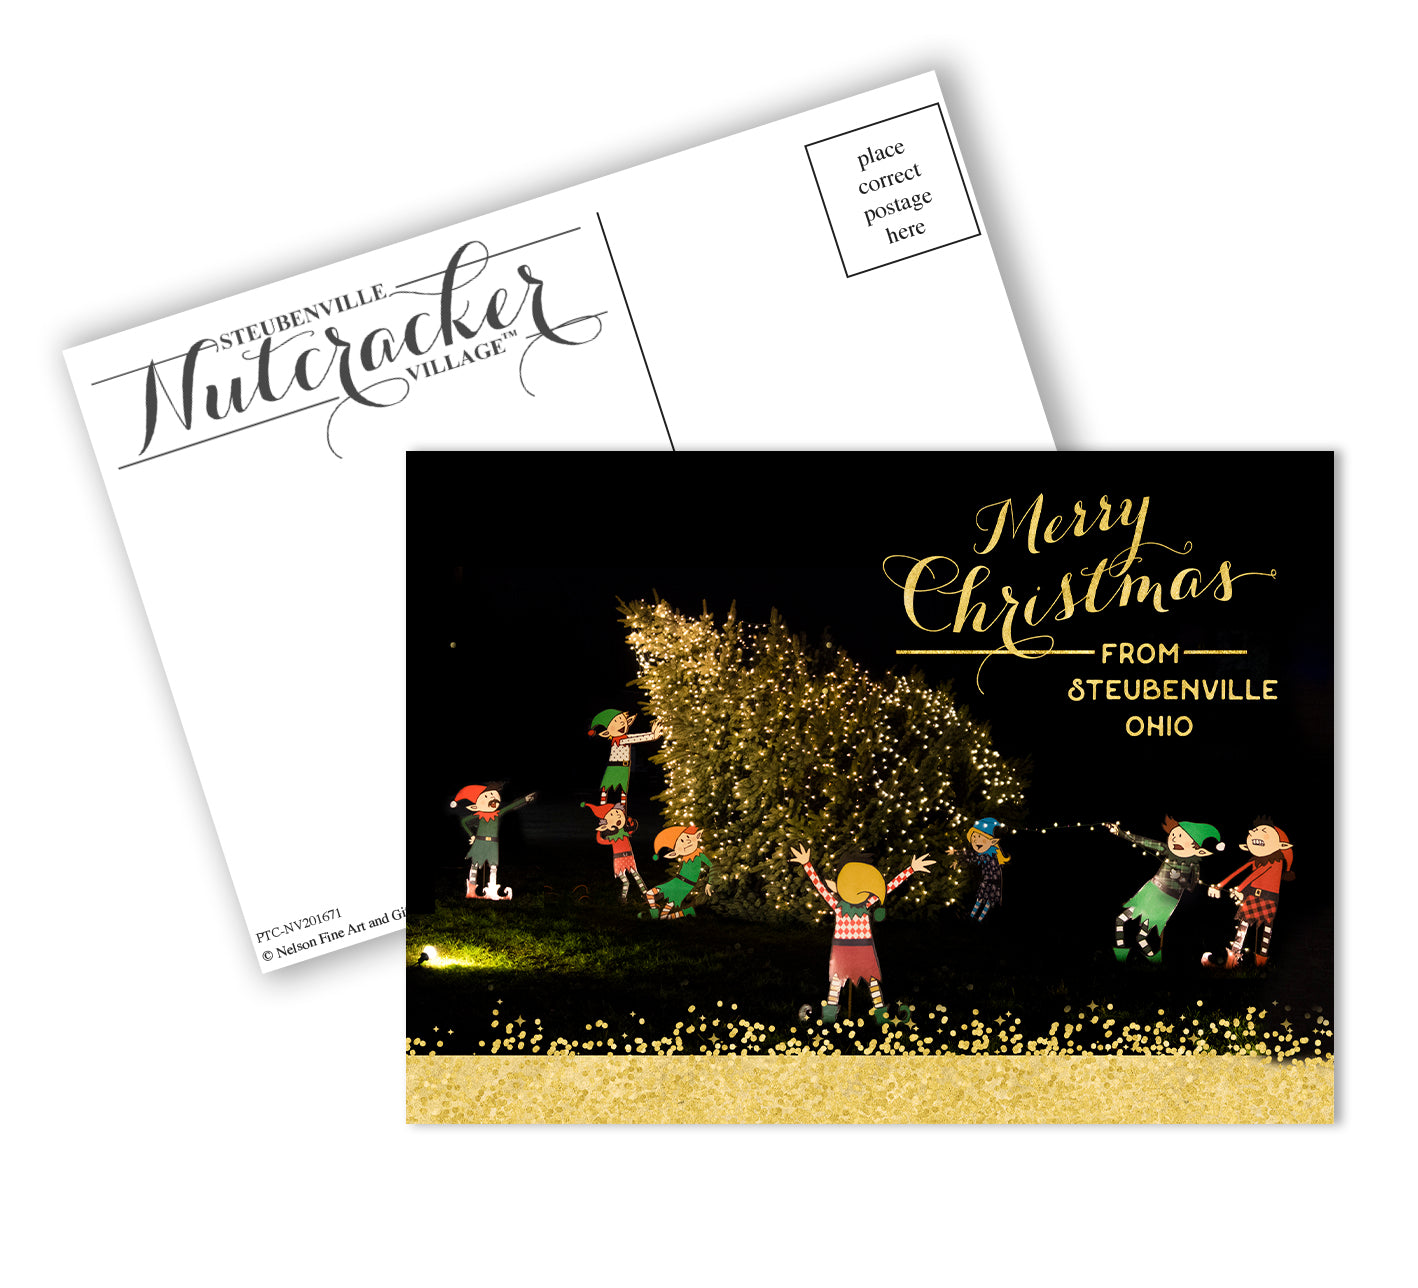 Steubenville Elves with Falling Tree Christmas Postcard